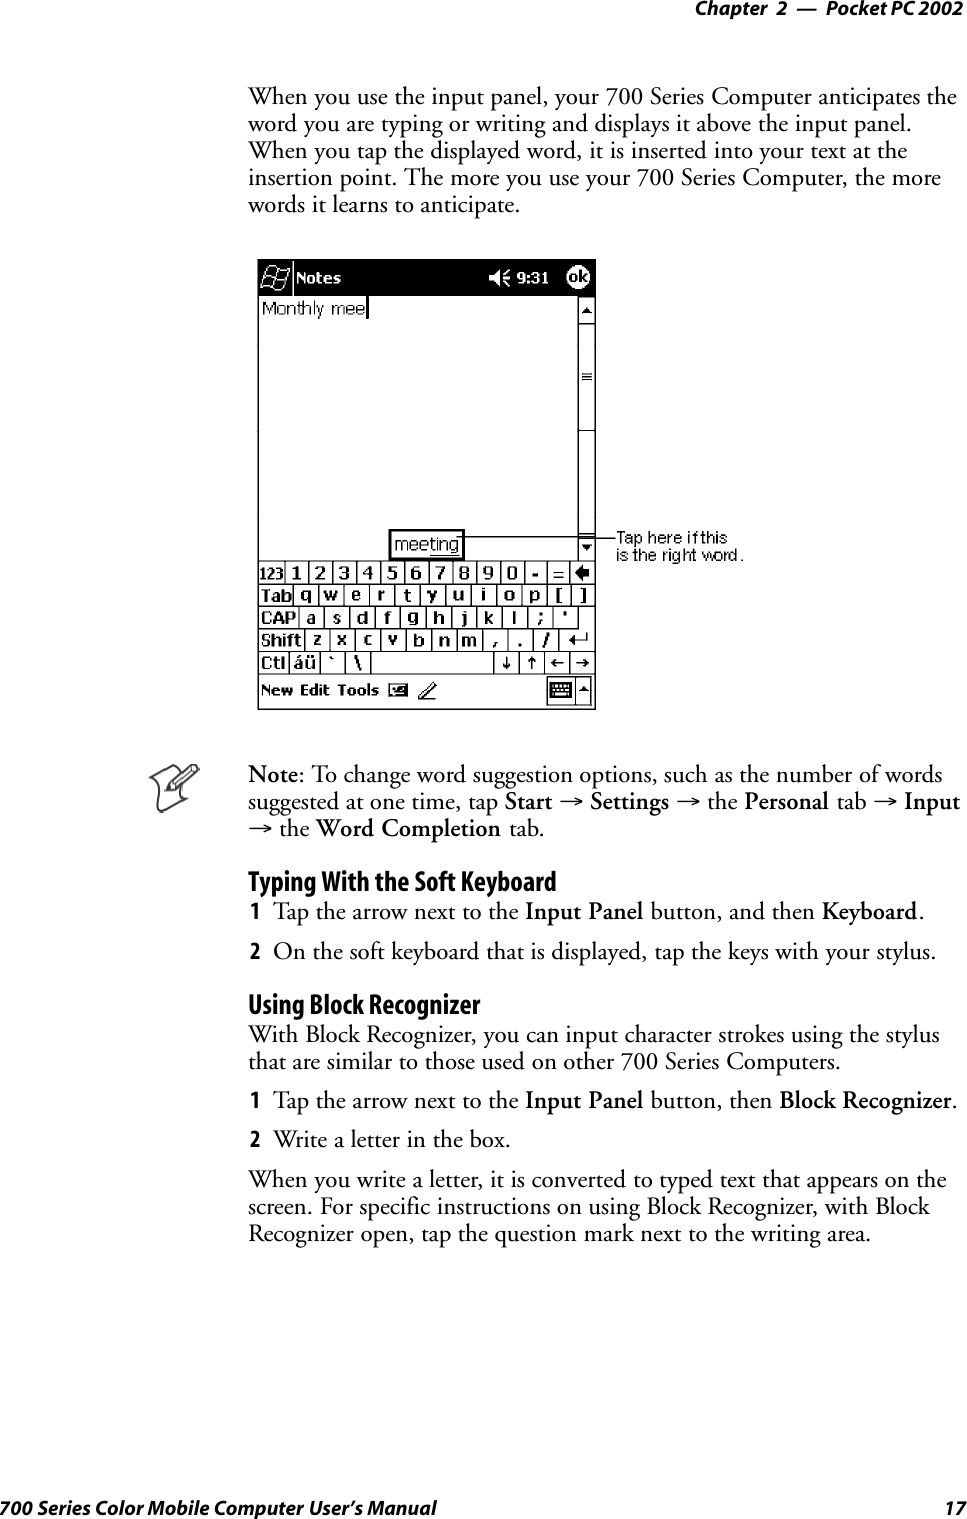 Pocket PC 2002—Chapter 217700 Series Color Mobile Computer User’s ManualWhen you use the input panel, your 700 Series Computer anticipates theword you are typing or writing and displays it above the input panel.When you tap the displayed word, it is inserted into your text at theinsertion point. The more you use your 700 Series Computer, the morewords it learns to anticipate.Note: To change word suggestion options, such as the number of wordssuggested at one time, tap Start →Settings →the Personal tab →Input→the Word Completion tab.Typing With the Soft Keyboard1Tap the arrow next to the Input Panel button, and then Keyboard.2On the soft keyboard that is displayed, tap the keys with your stylus.Using Block RecognizerWith Block Recognizer, you can input character strokes using the stylusthat are similar to those used on other 700 Series Computers.1Tap the arrow next to the Input Panel button, then Block Recognizer.2Write a letter in the box.When you write a letter, it is converted to typed text that appears on thescreen. For specific instructions on using Block Recognizer, with BlockRecognizer open, tap the question mark next to the writing area.